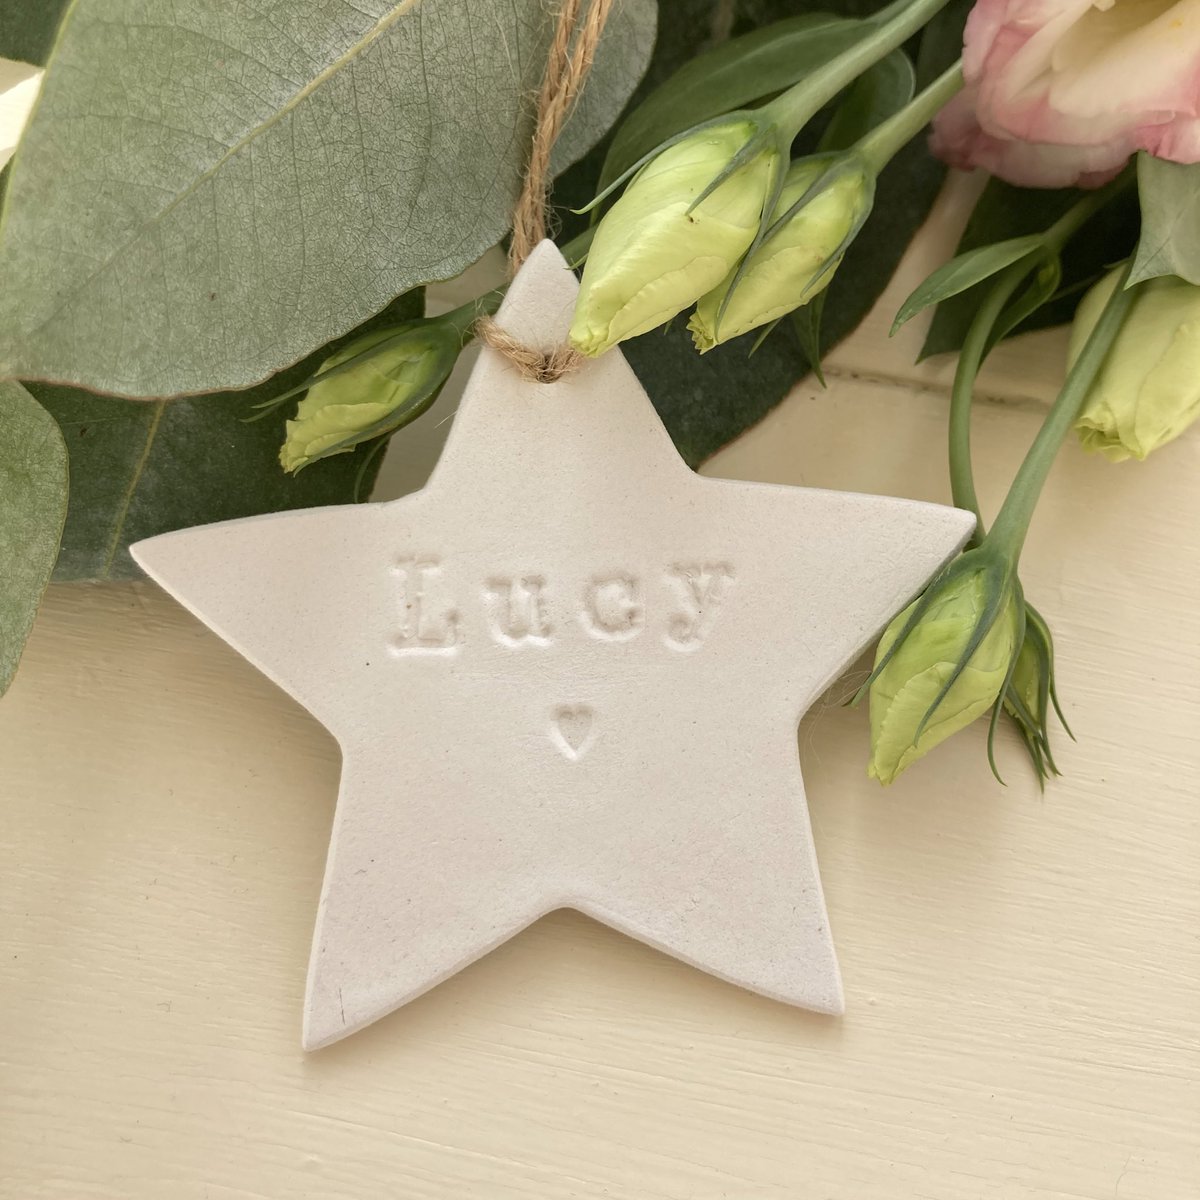 My personalised stars make a perfect for a gift or Christmas decorations. Pop to my Etsy shop to have a look 🤍
#claystar #weddingfavours #christmastree #christmasdecor #christmasdecorations #handmadeclay #rusticstar #claystardecor #weddingdecor #etsyshopuk #etsy #acornstationery